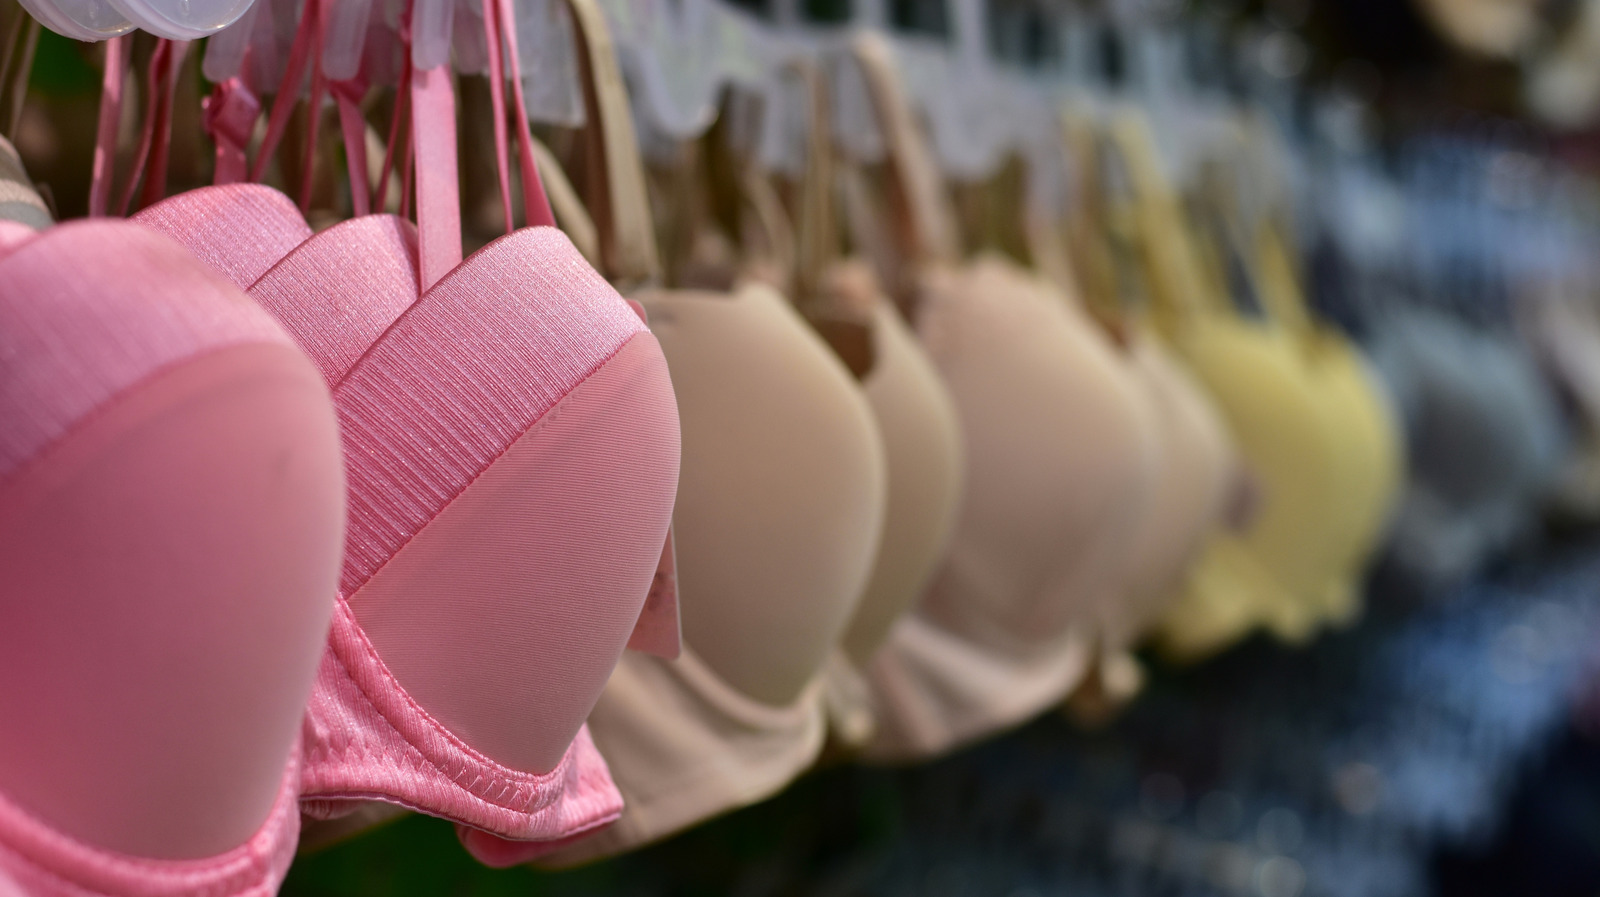 https://www.thelist.com/img/gallery/the-real-reasons-bras-are-so-expensive/l-intro-1622171525.jpg